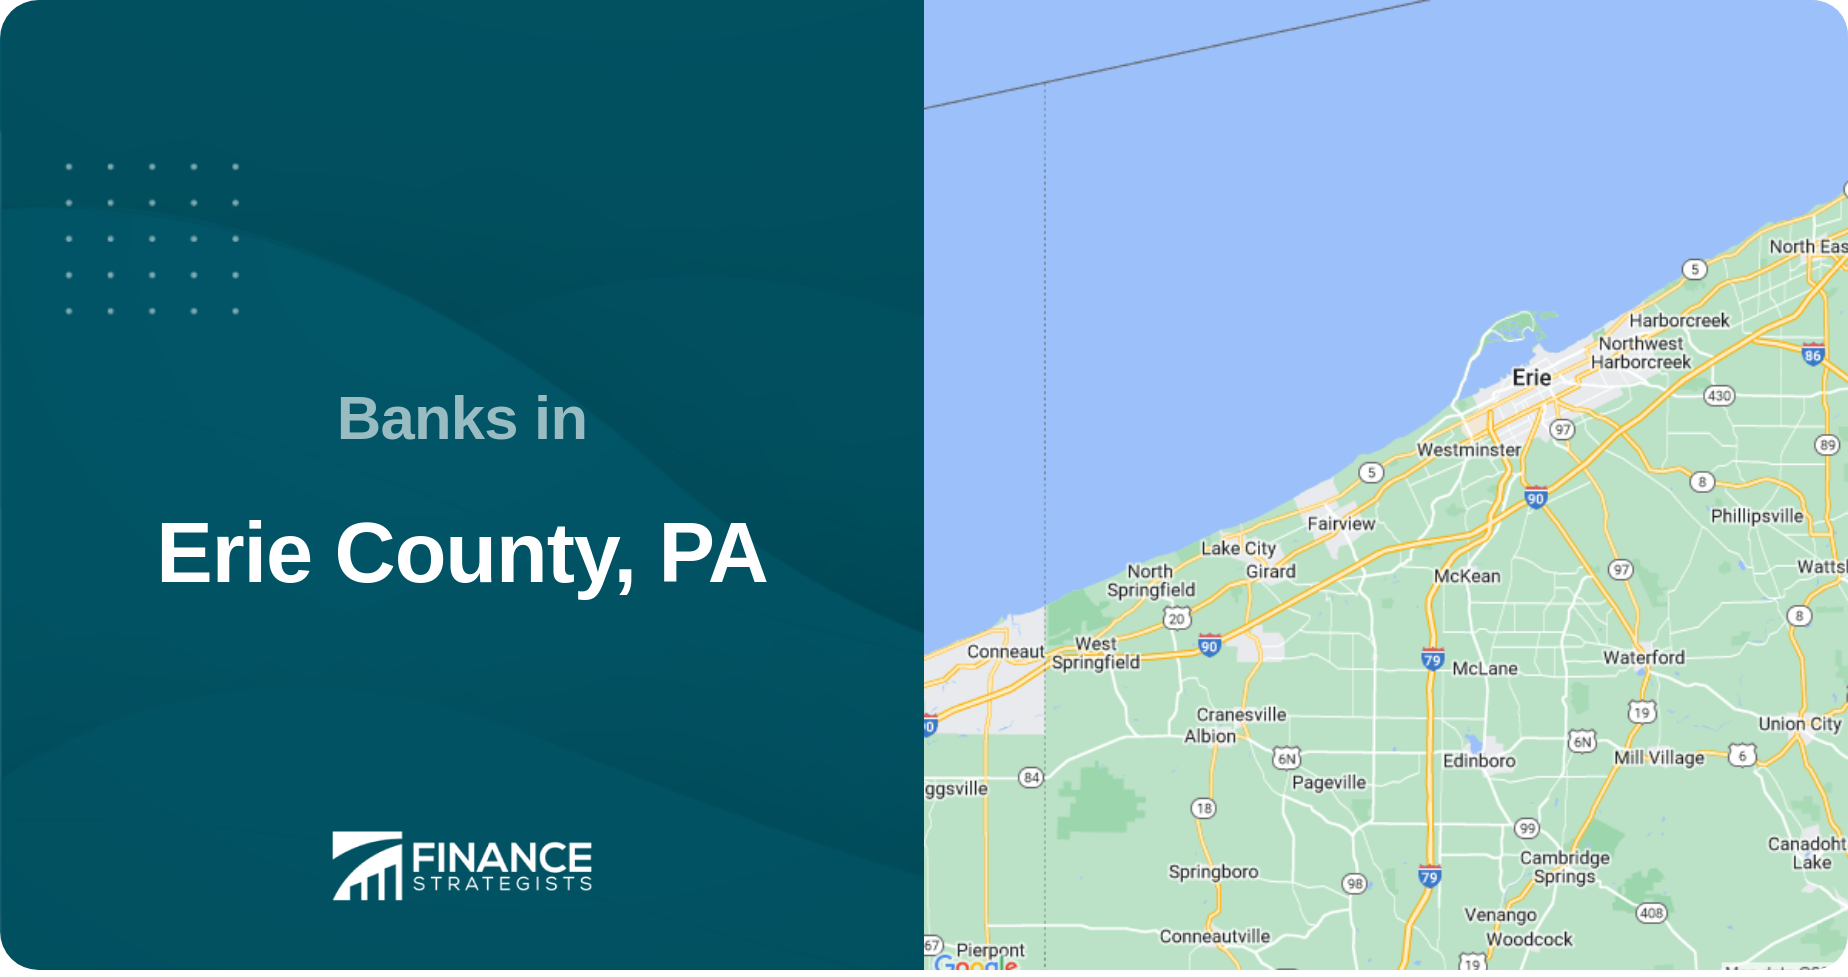 Banks in Erie County, PA